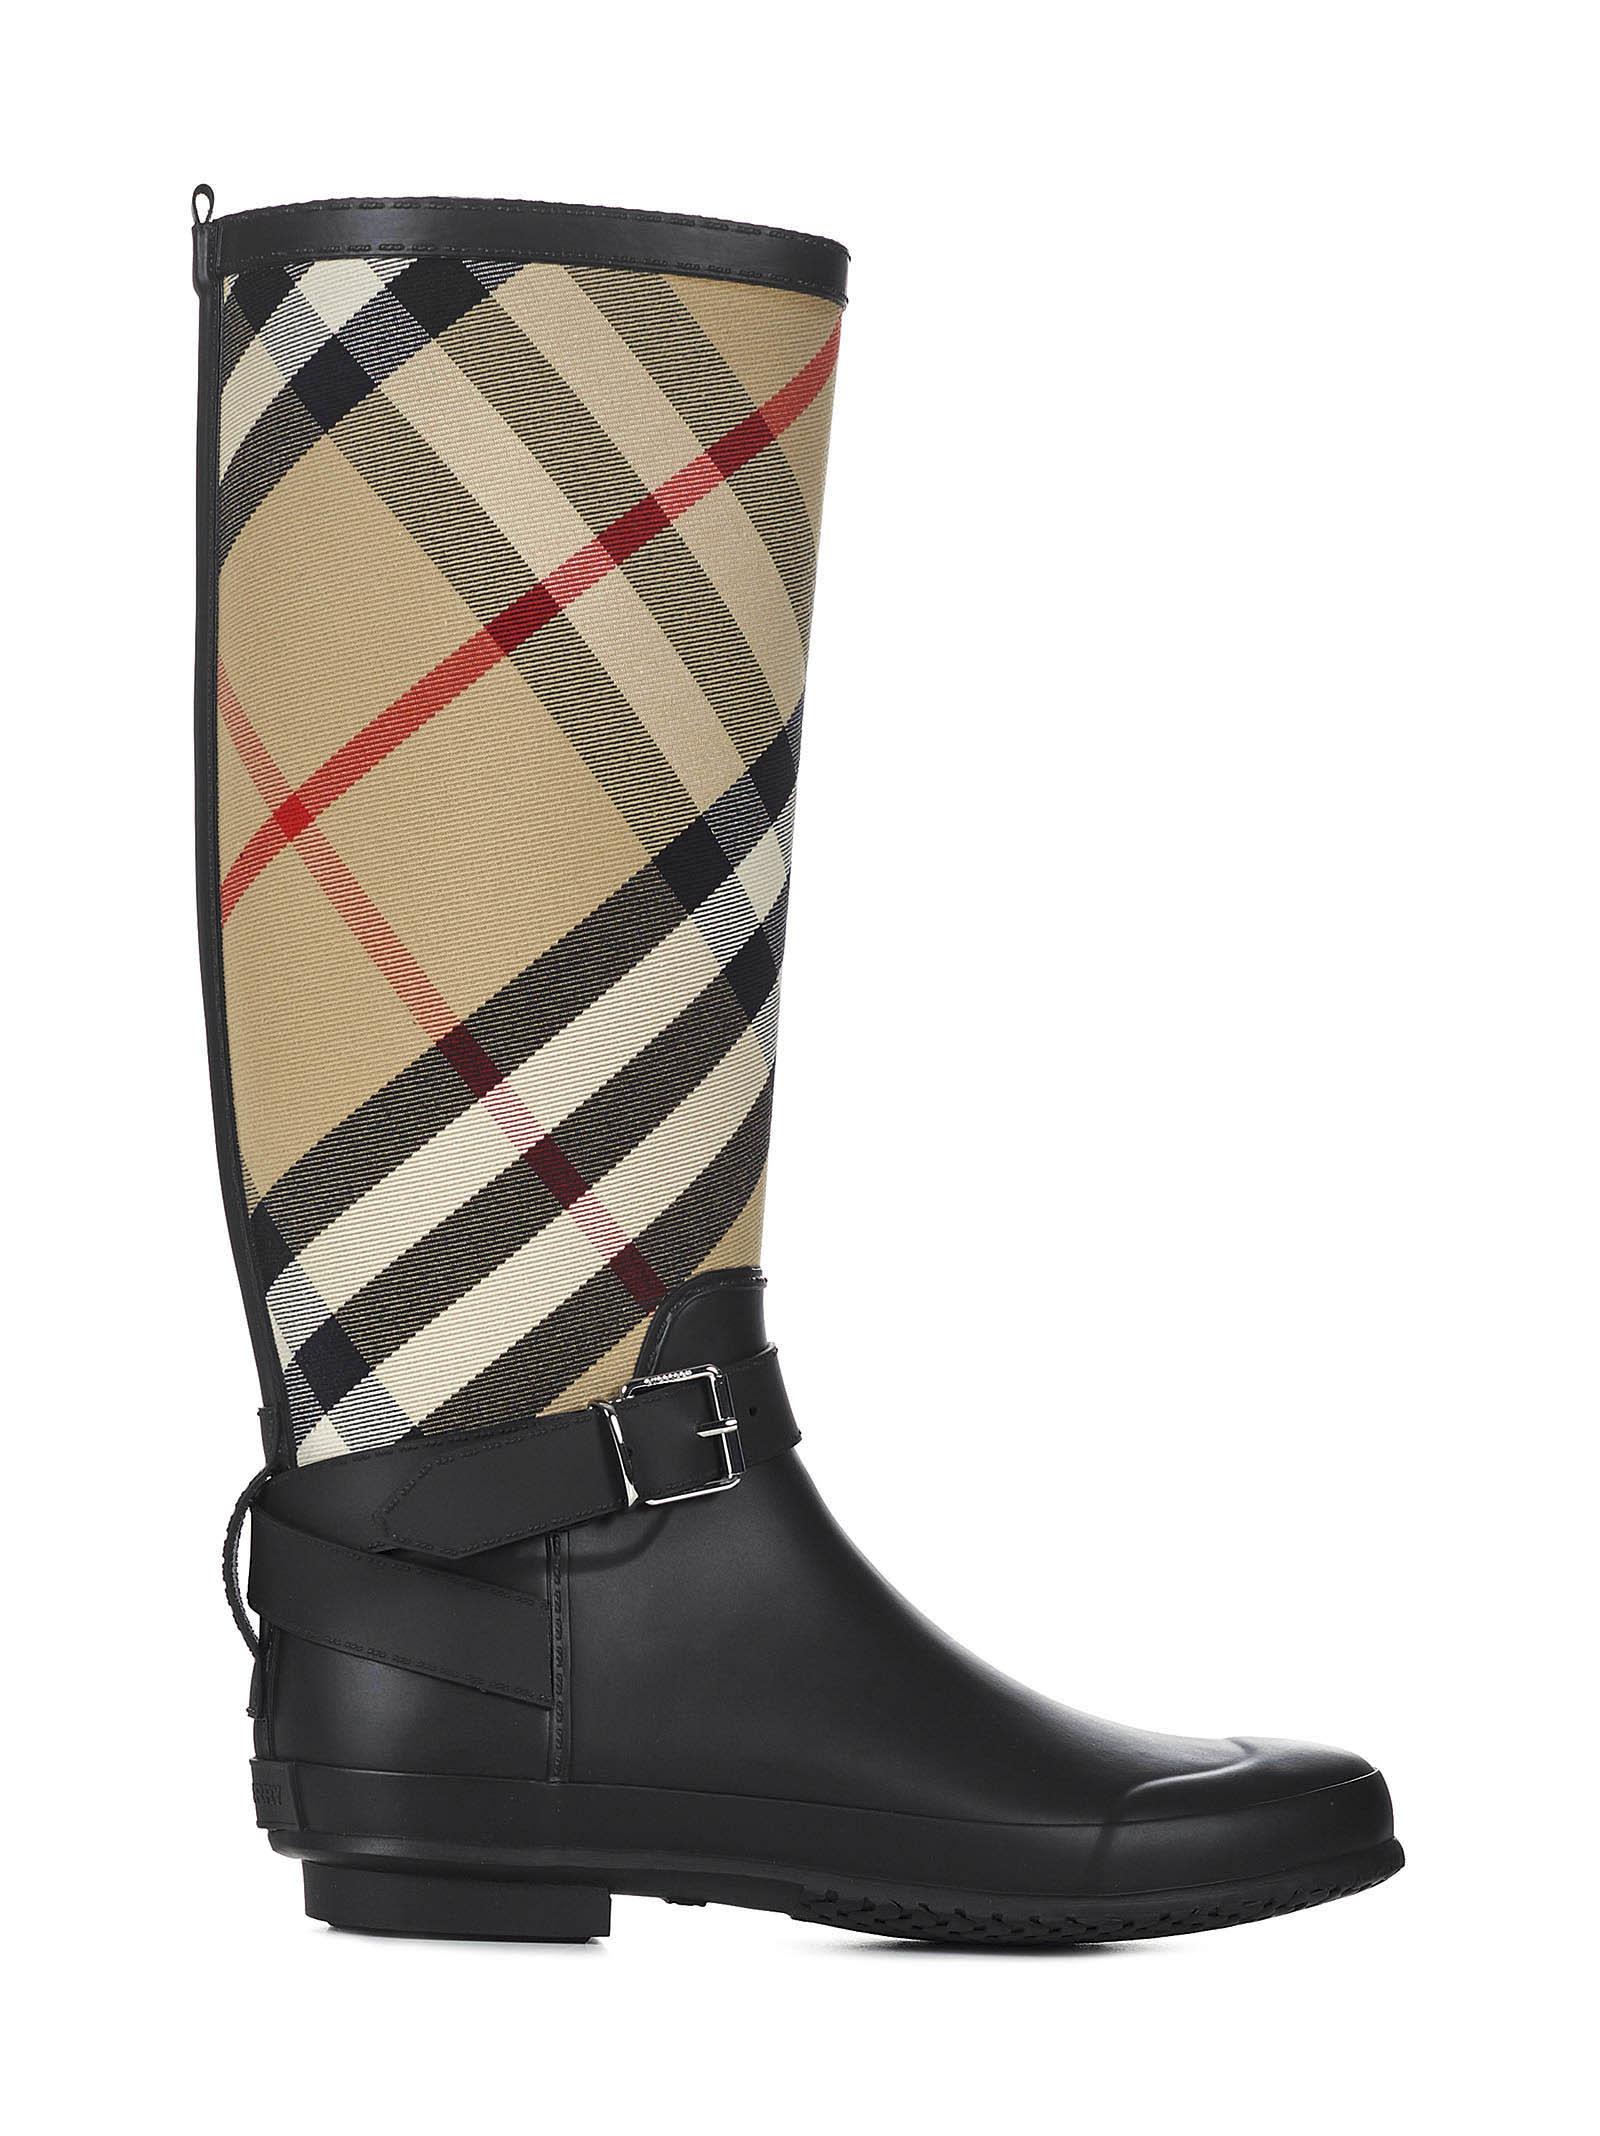 Burberry Rubber Boots in Black - Lyst